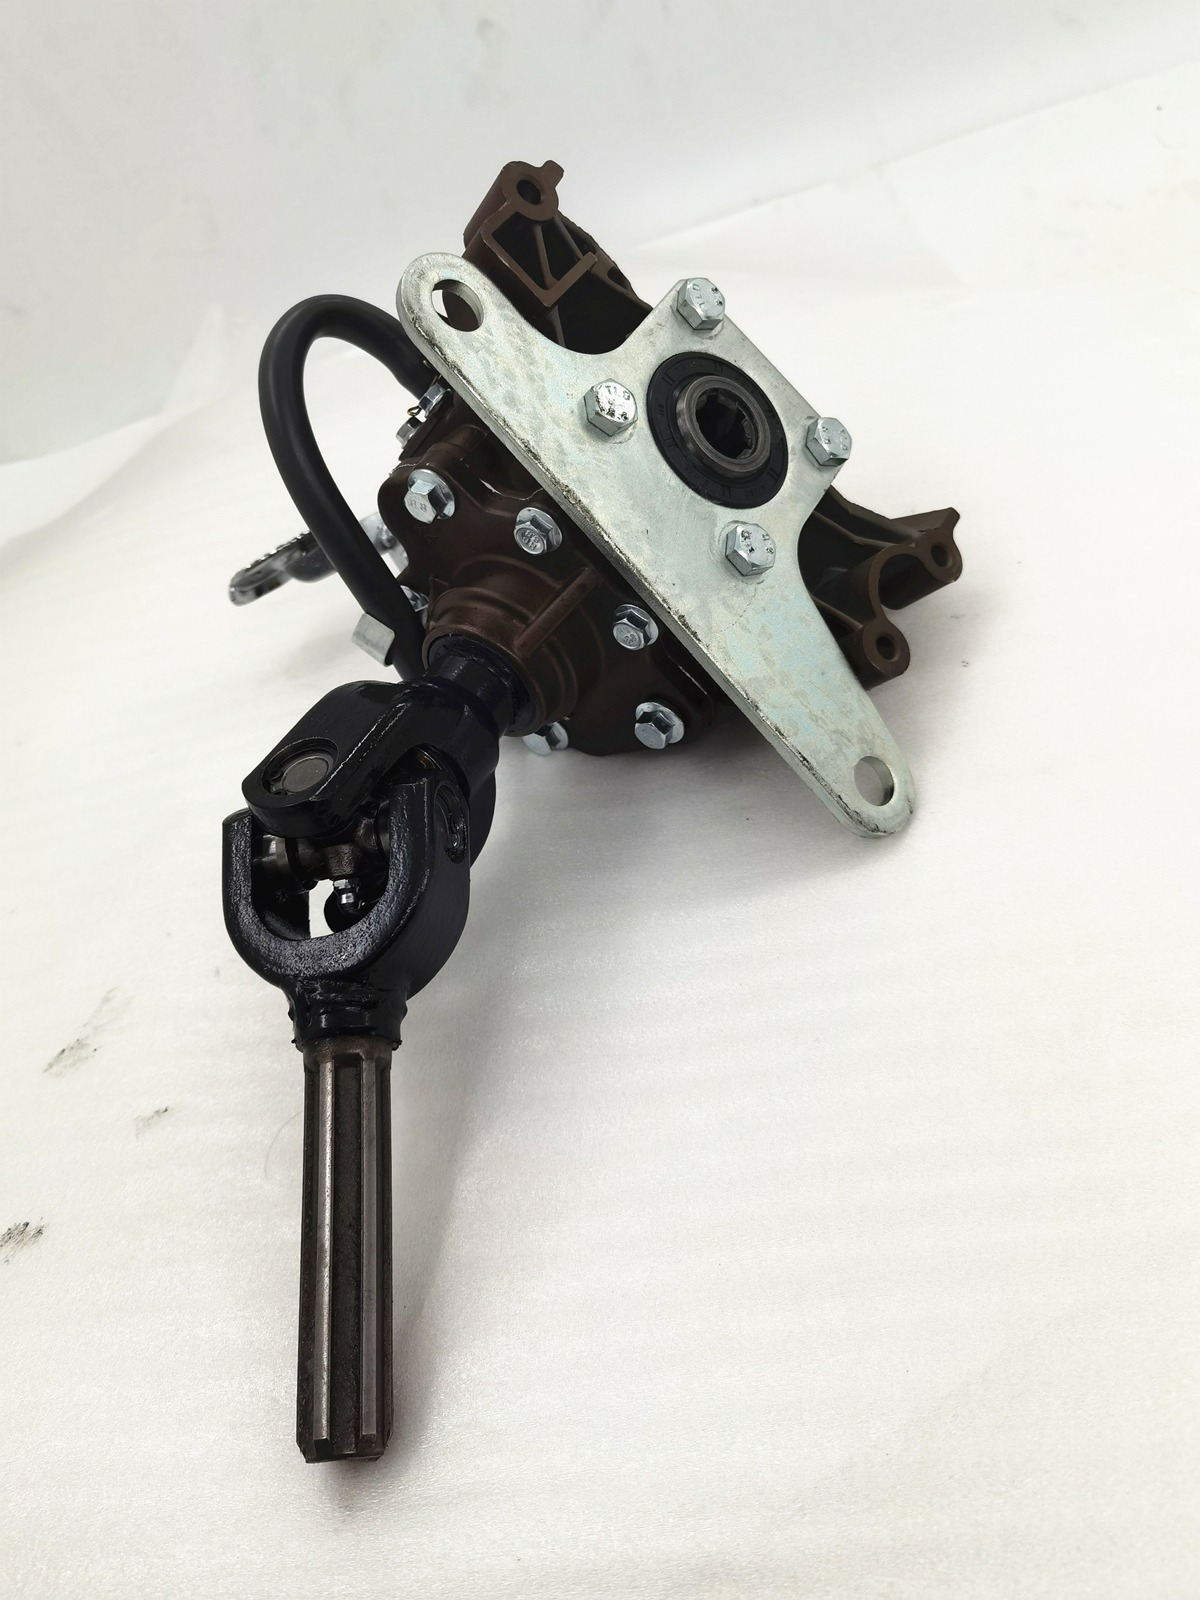 Brand new DAYANG Chuanyu 280 reverse gear box for Engine Motor Trike 3 Wheel Motorcycle Tricycle with big size base plate